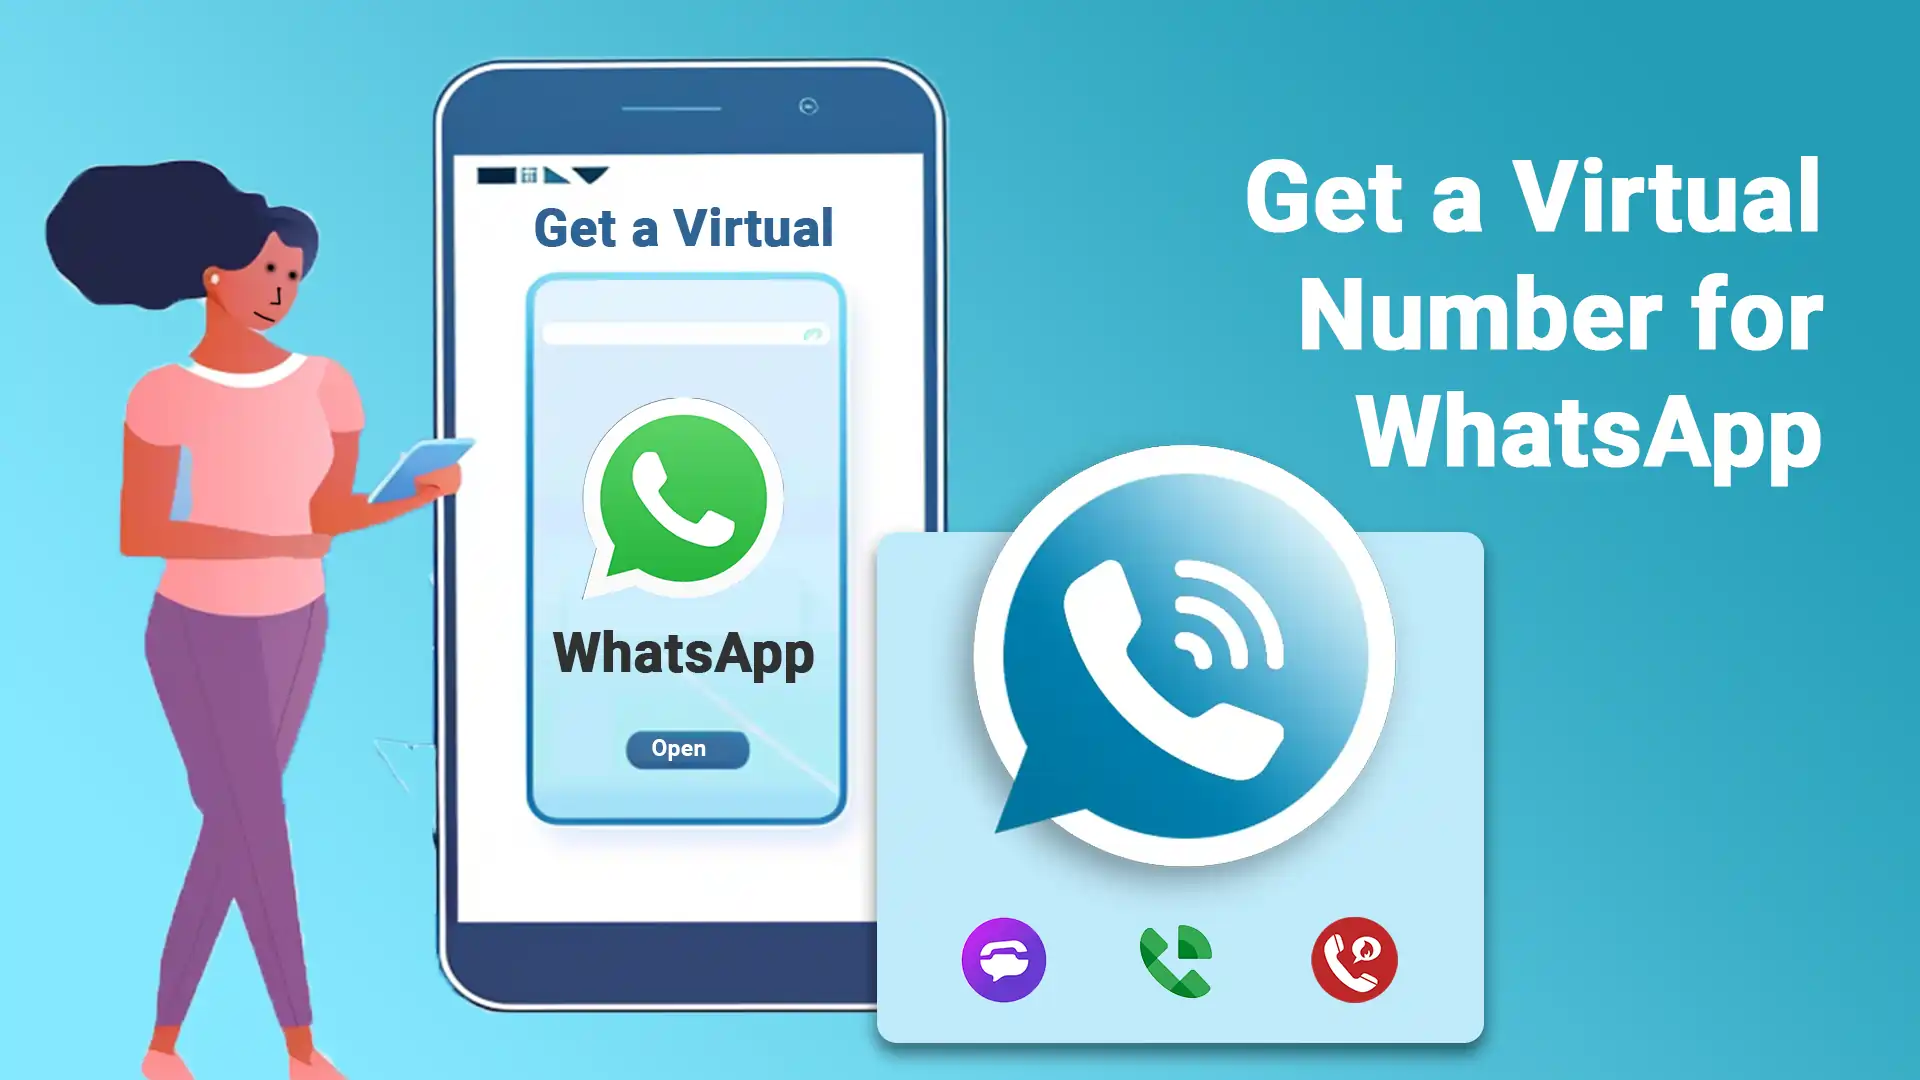 Easy Ways to Get a Virtual Number for WhatsApp